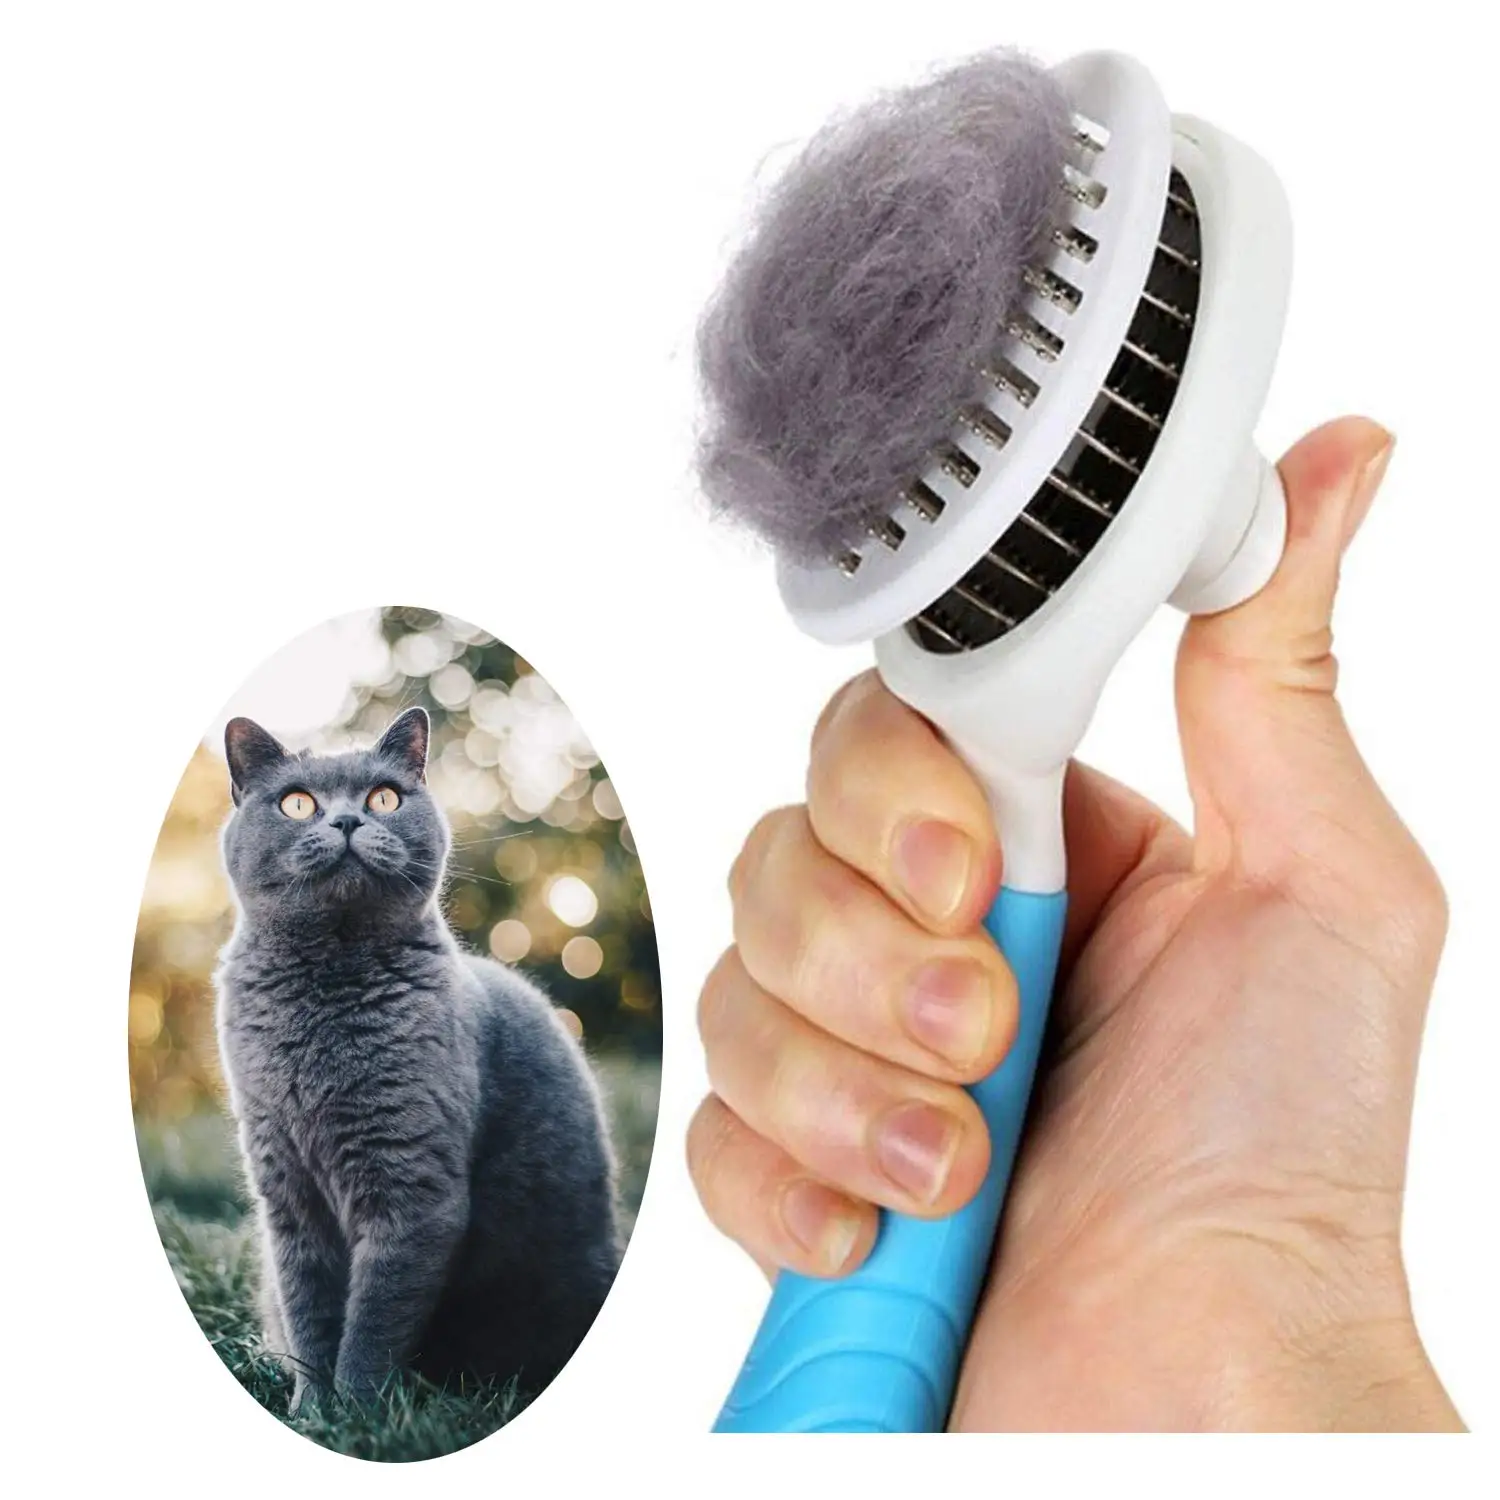 Hot Sale Self Cleaning Portable Pet Hair remover Comb